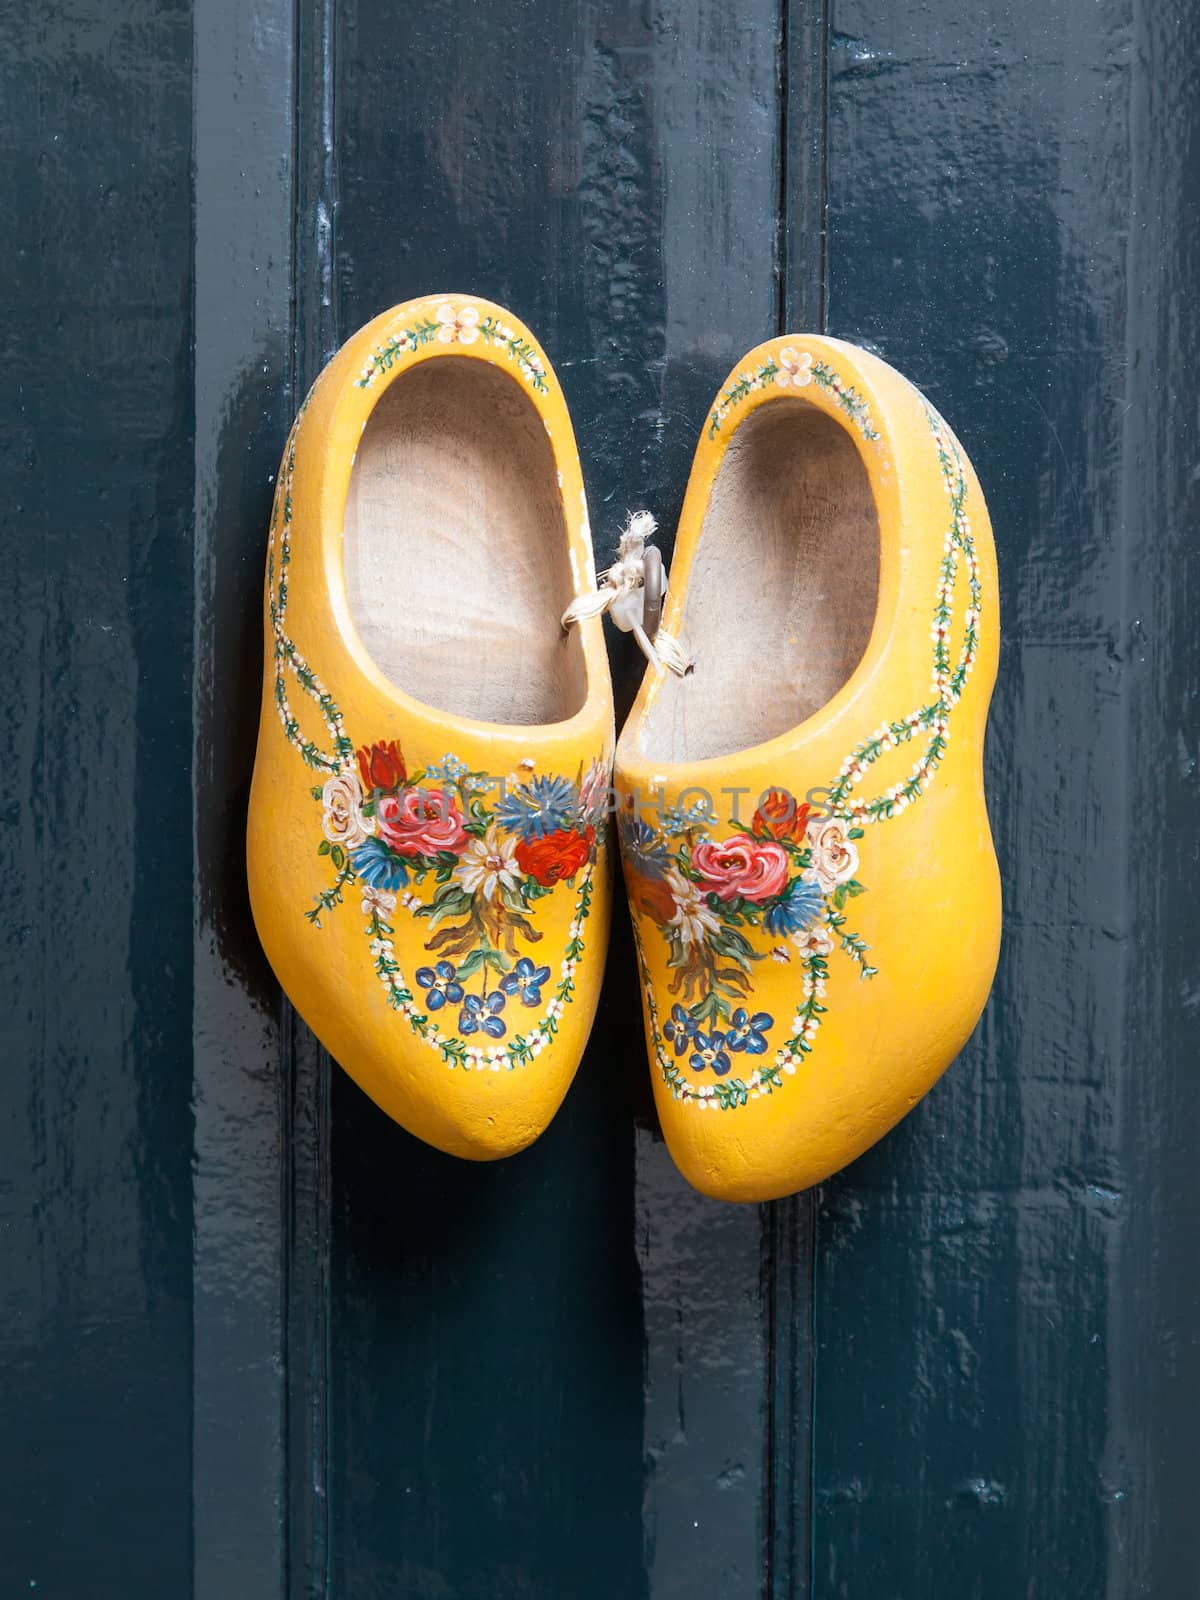 Dutch wooden shoes hanging by michaklootwijk